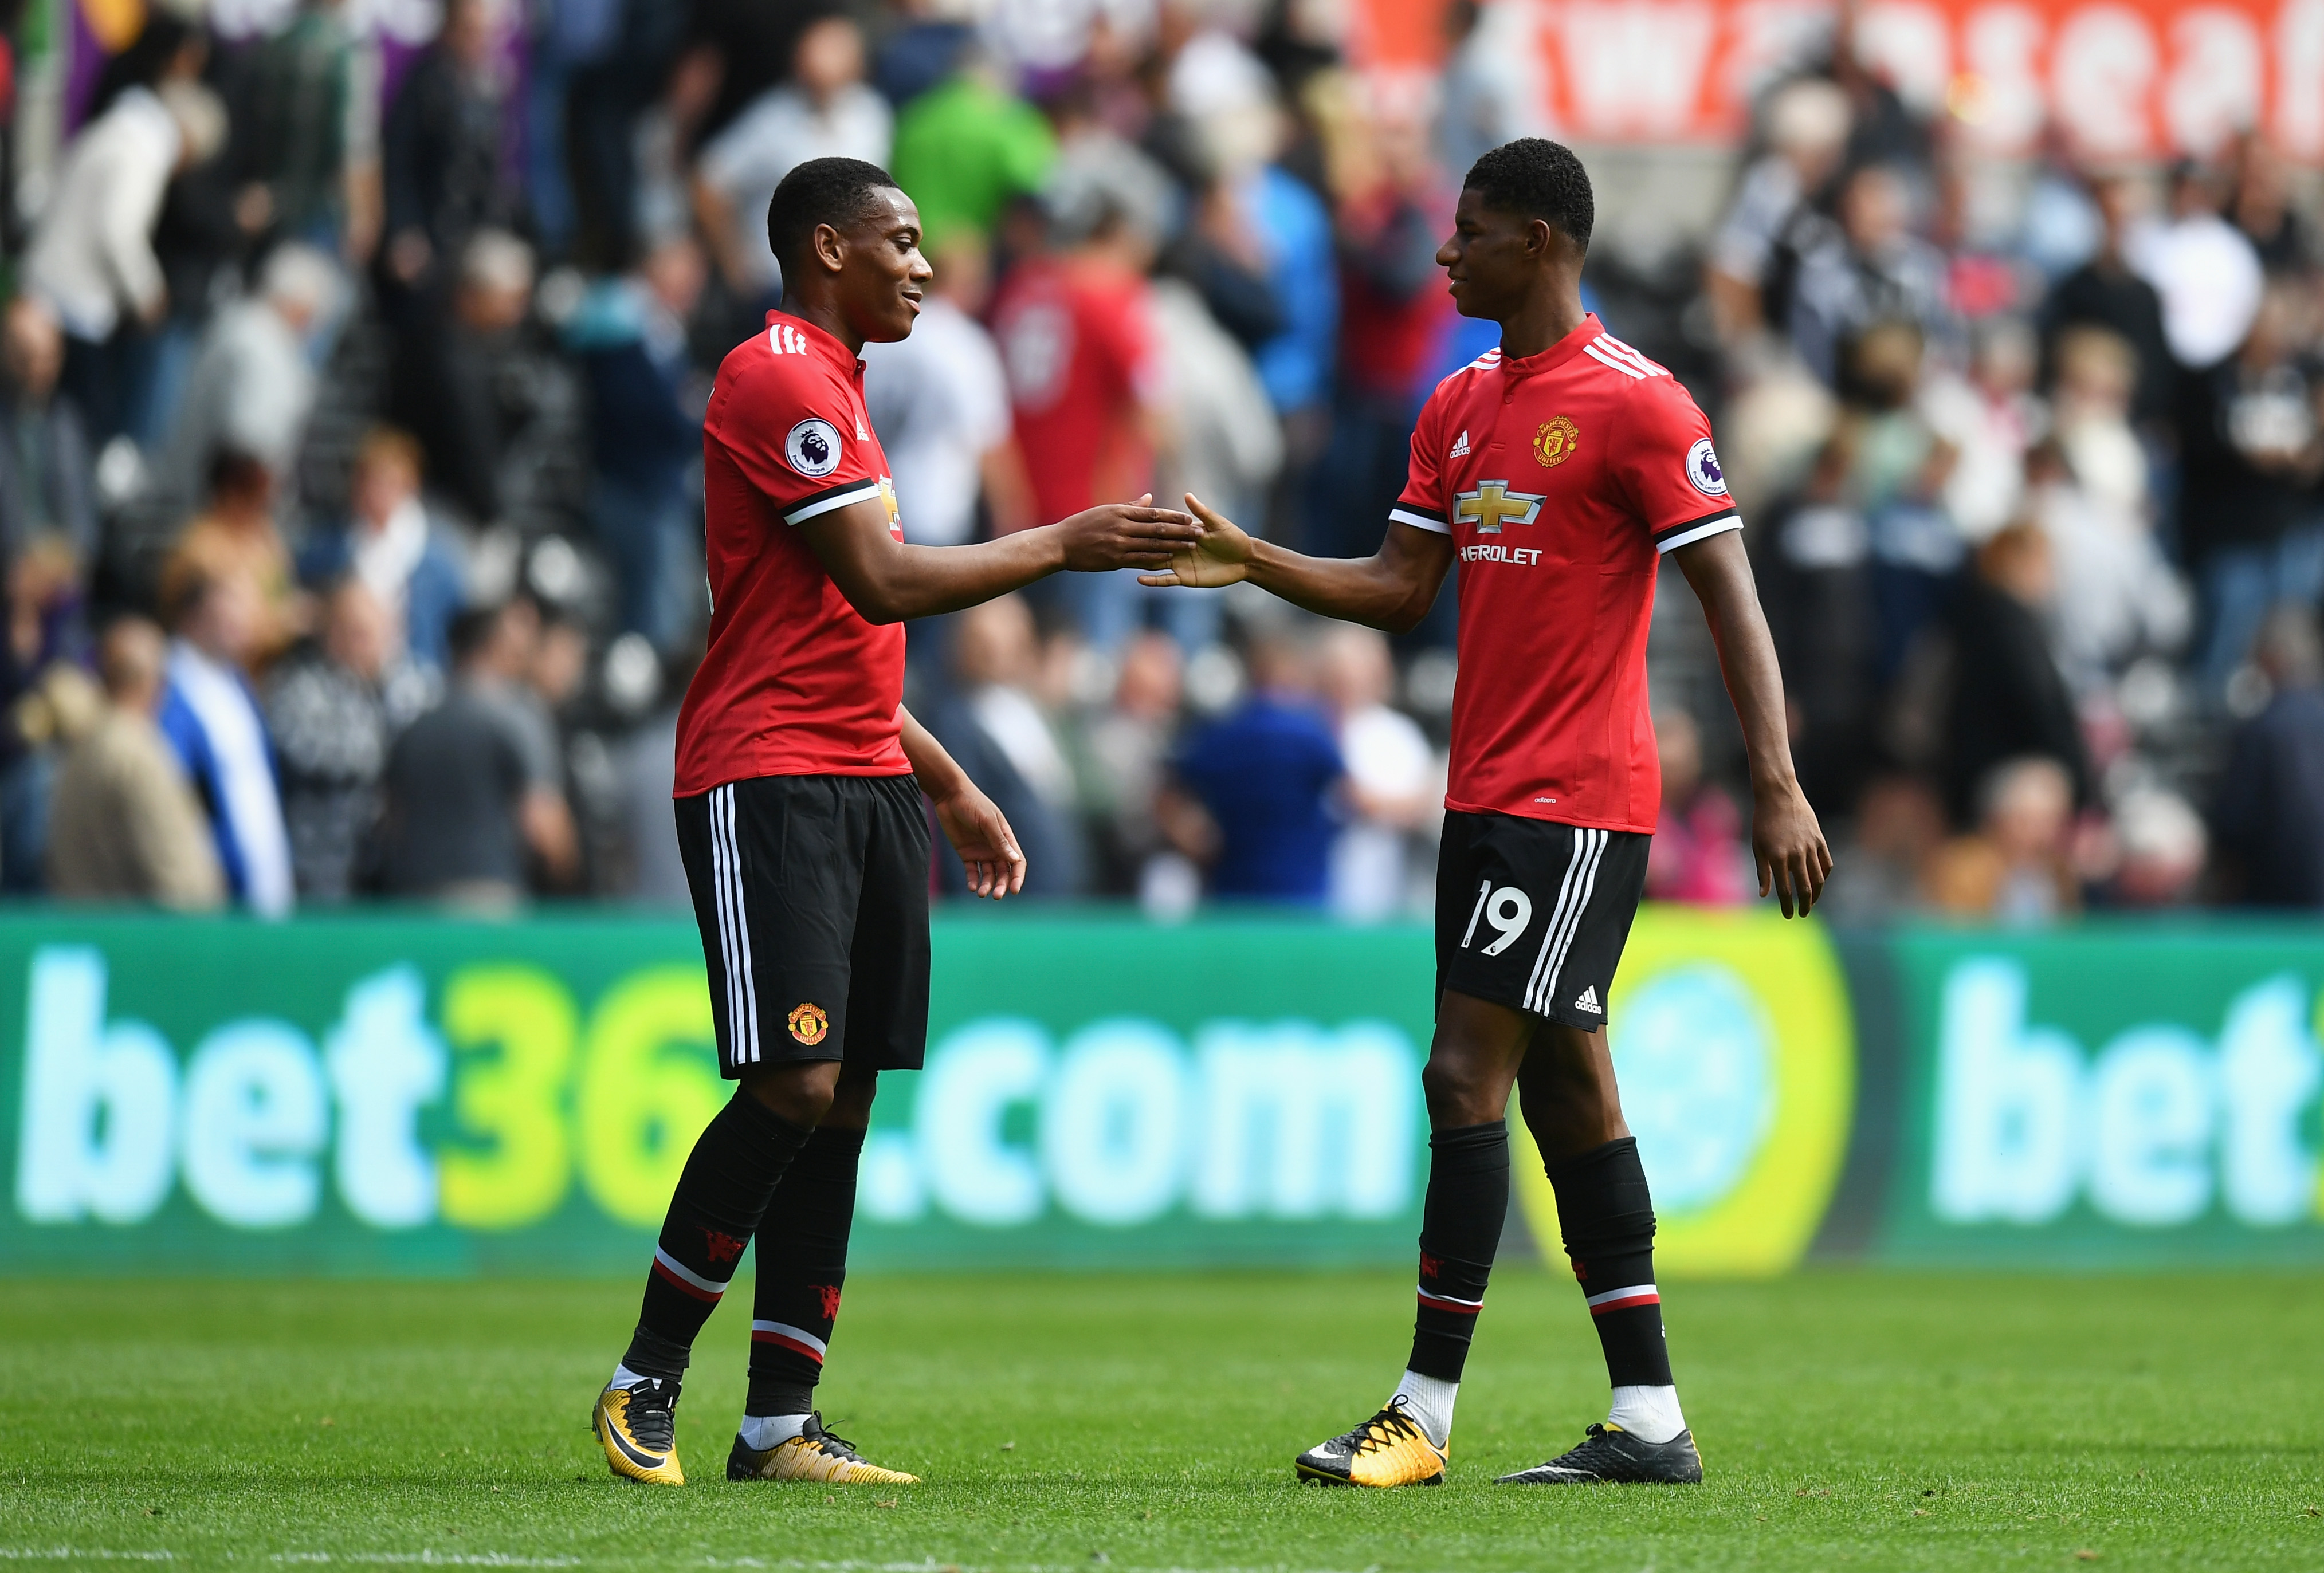 Both Rashford and Martial seem to have fallen out of favour with Mourinho (Picture Courtesy - AFP/Getty Images)